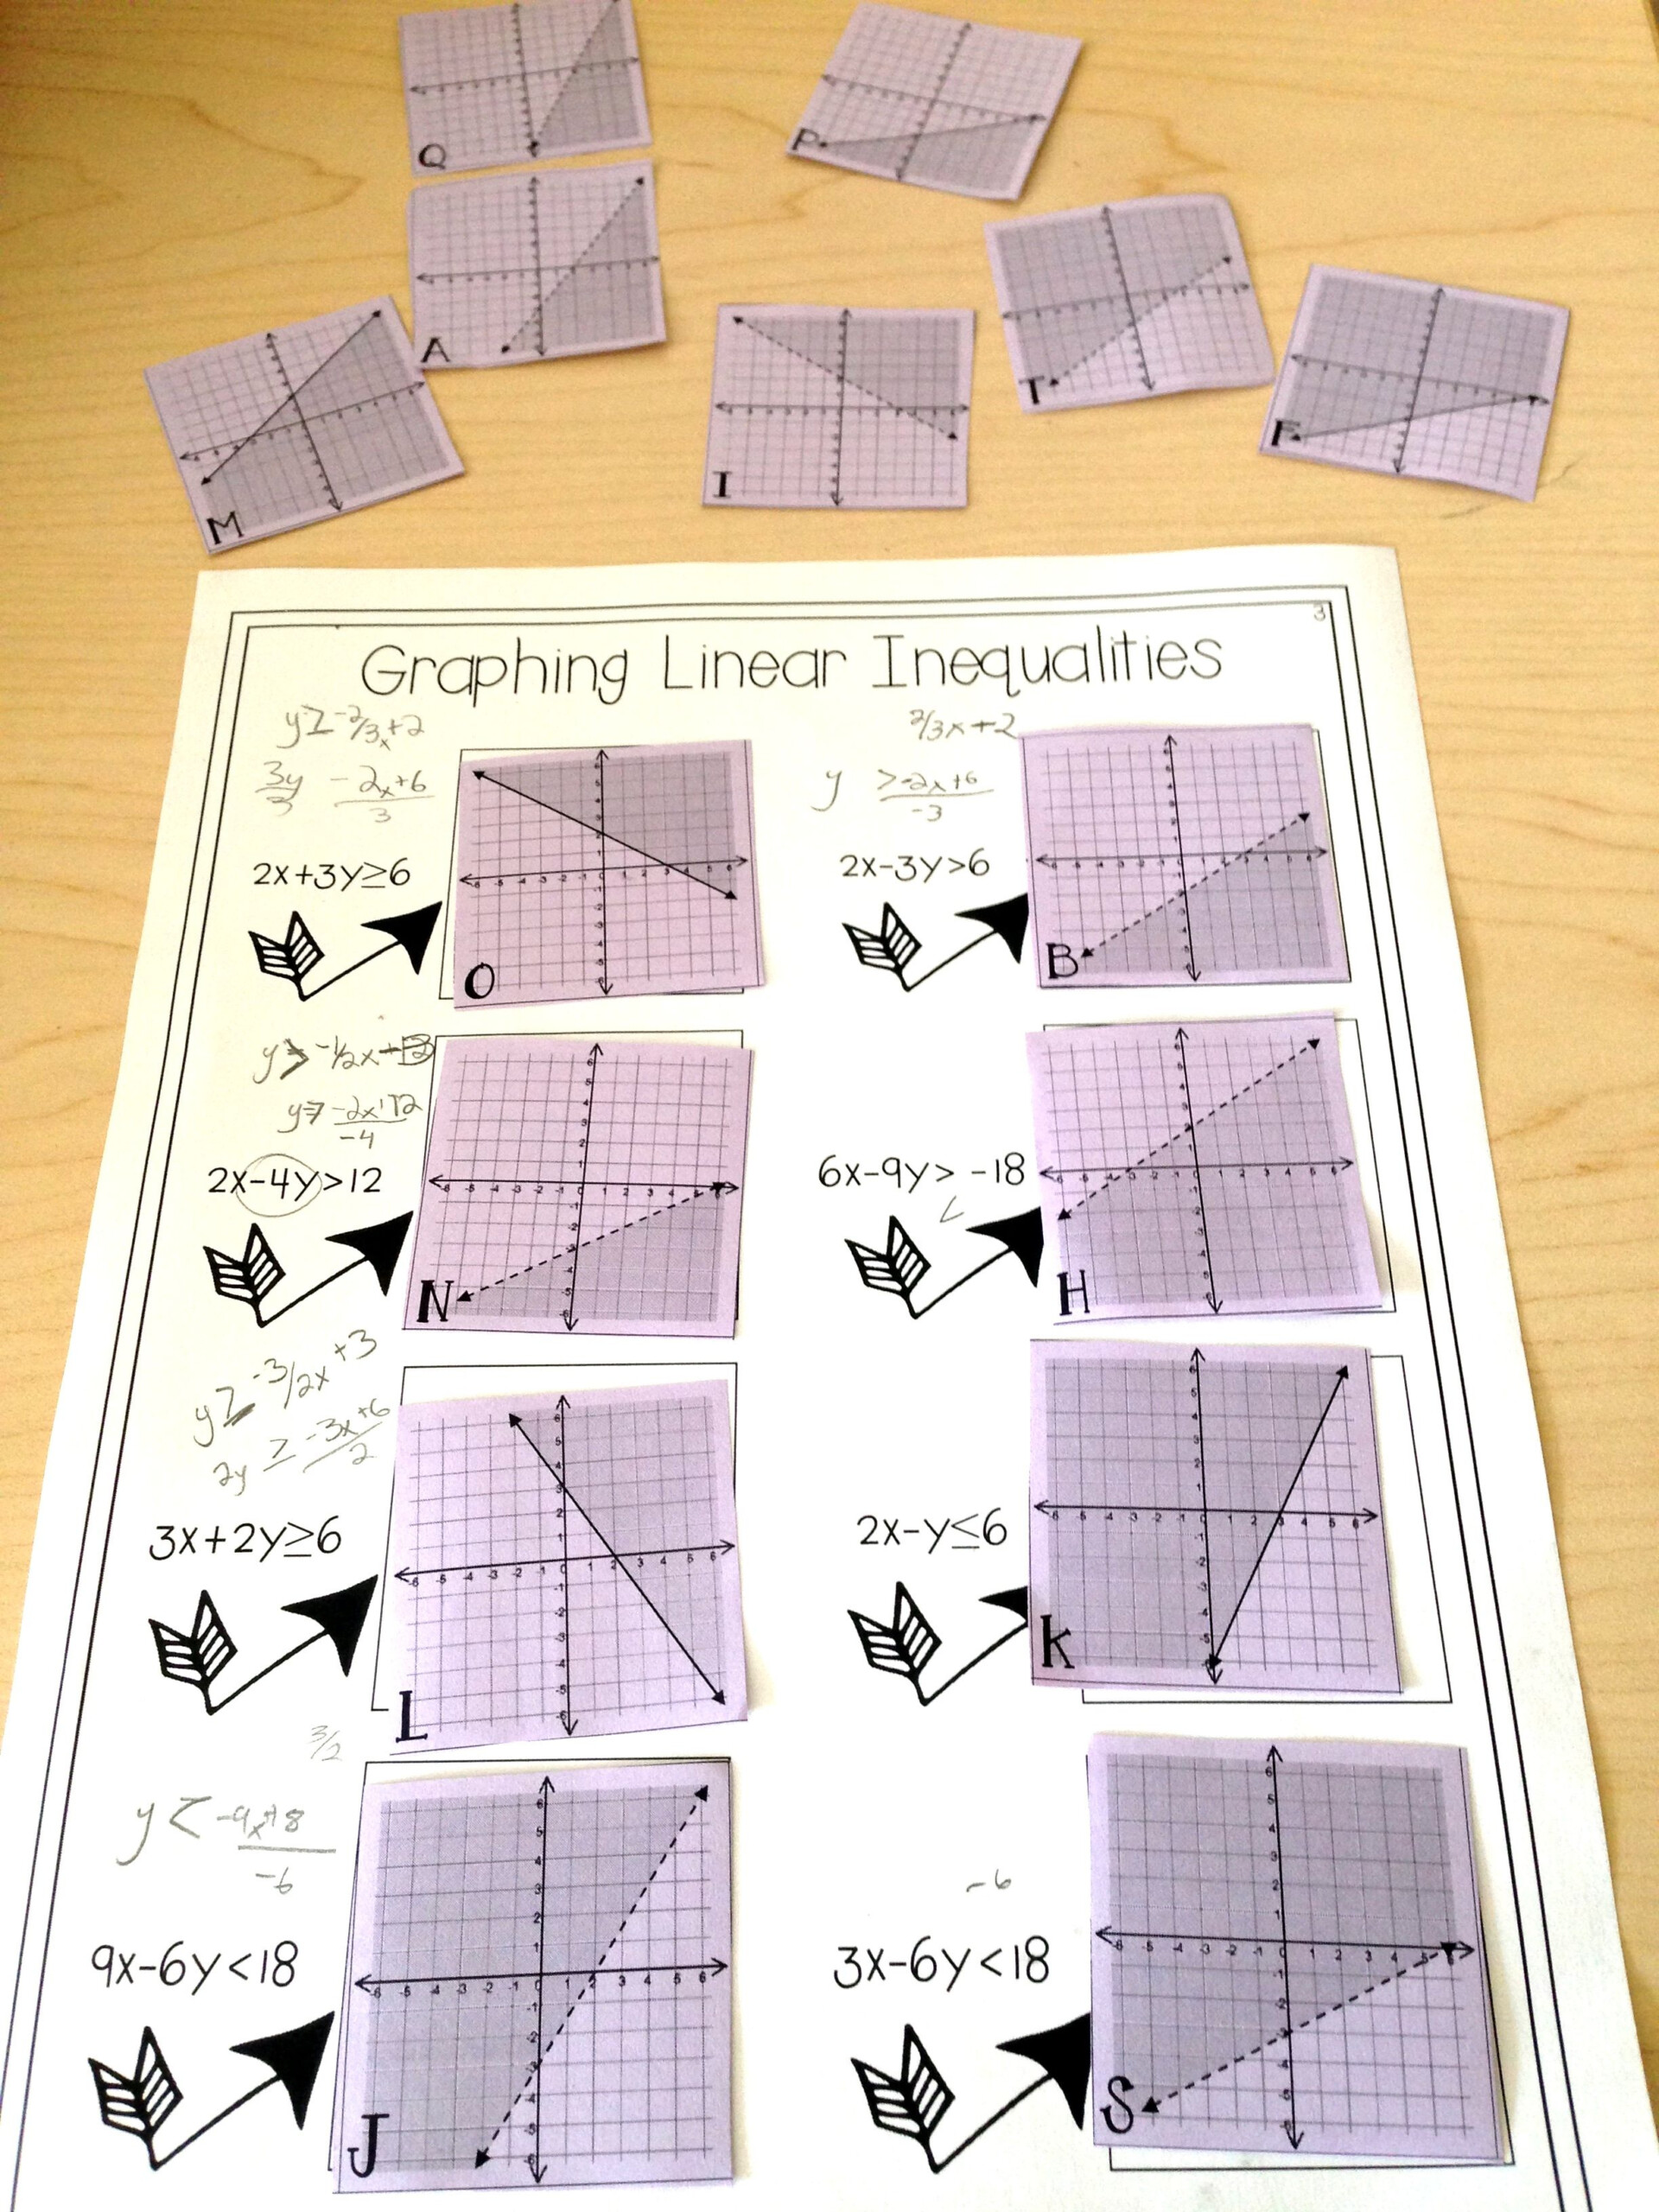 Graphing Linear Inequalities Card Match Activity Graphing Linear